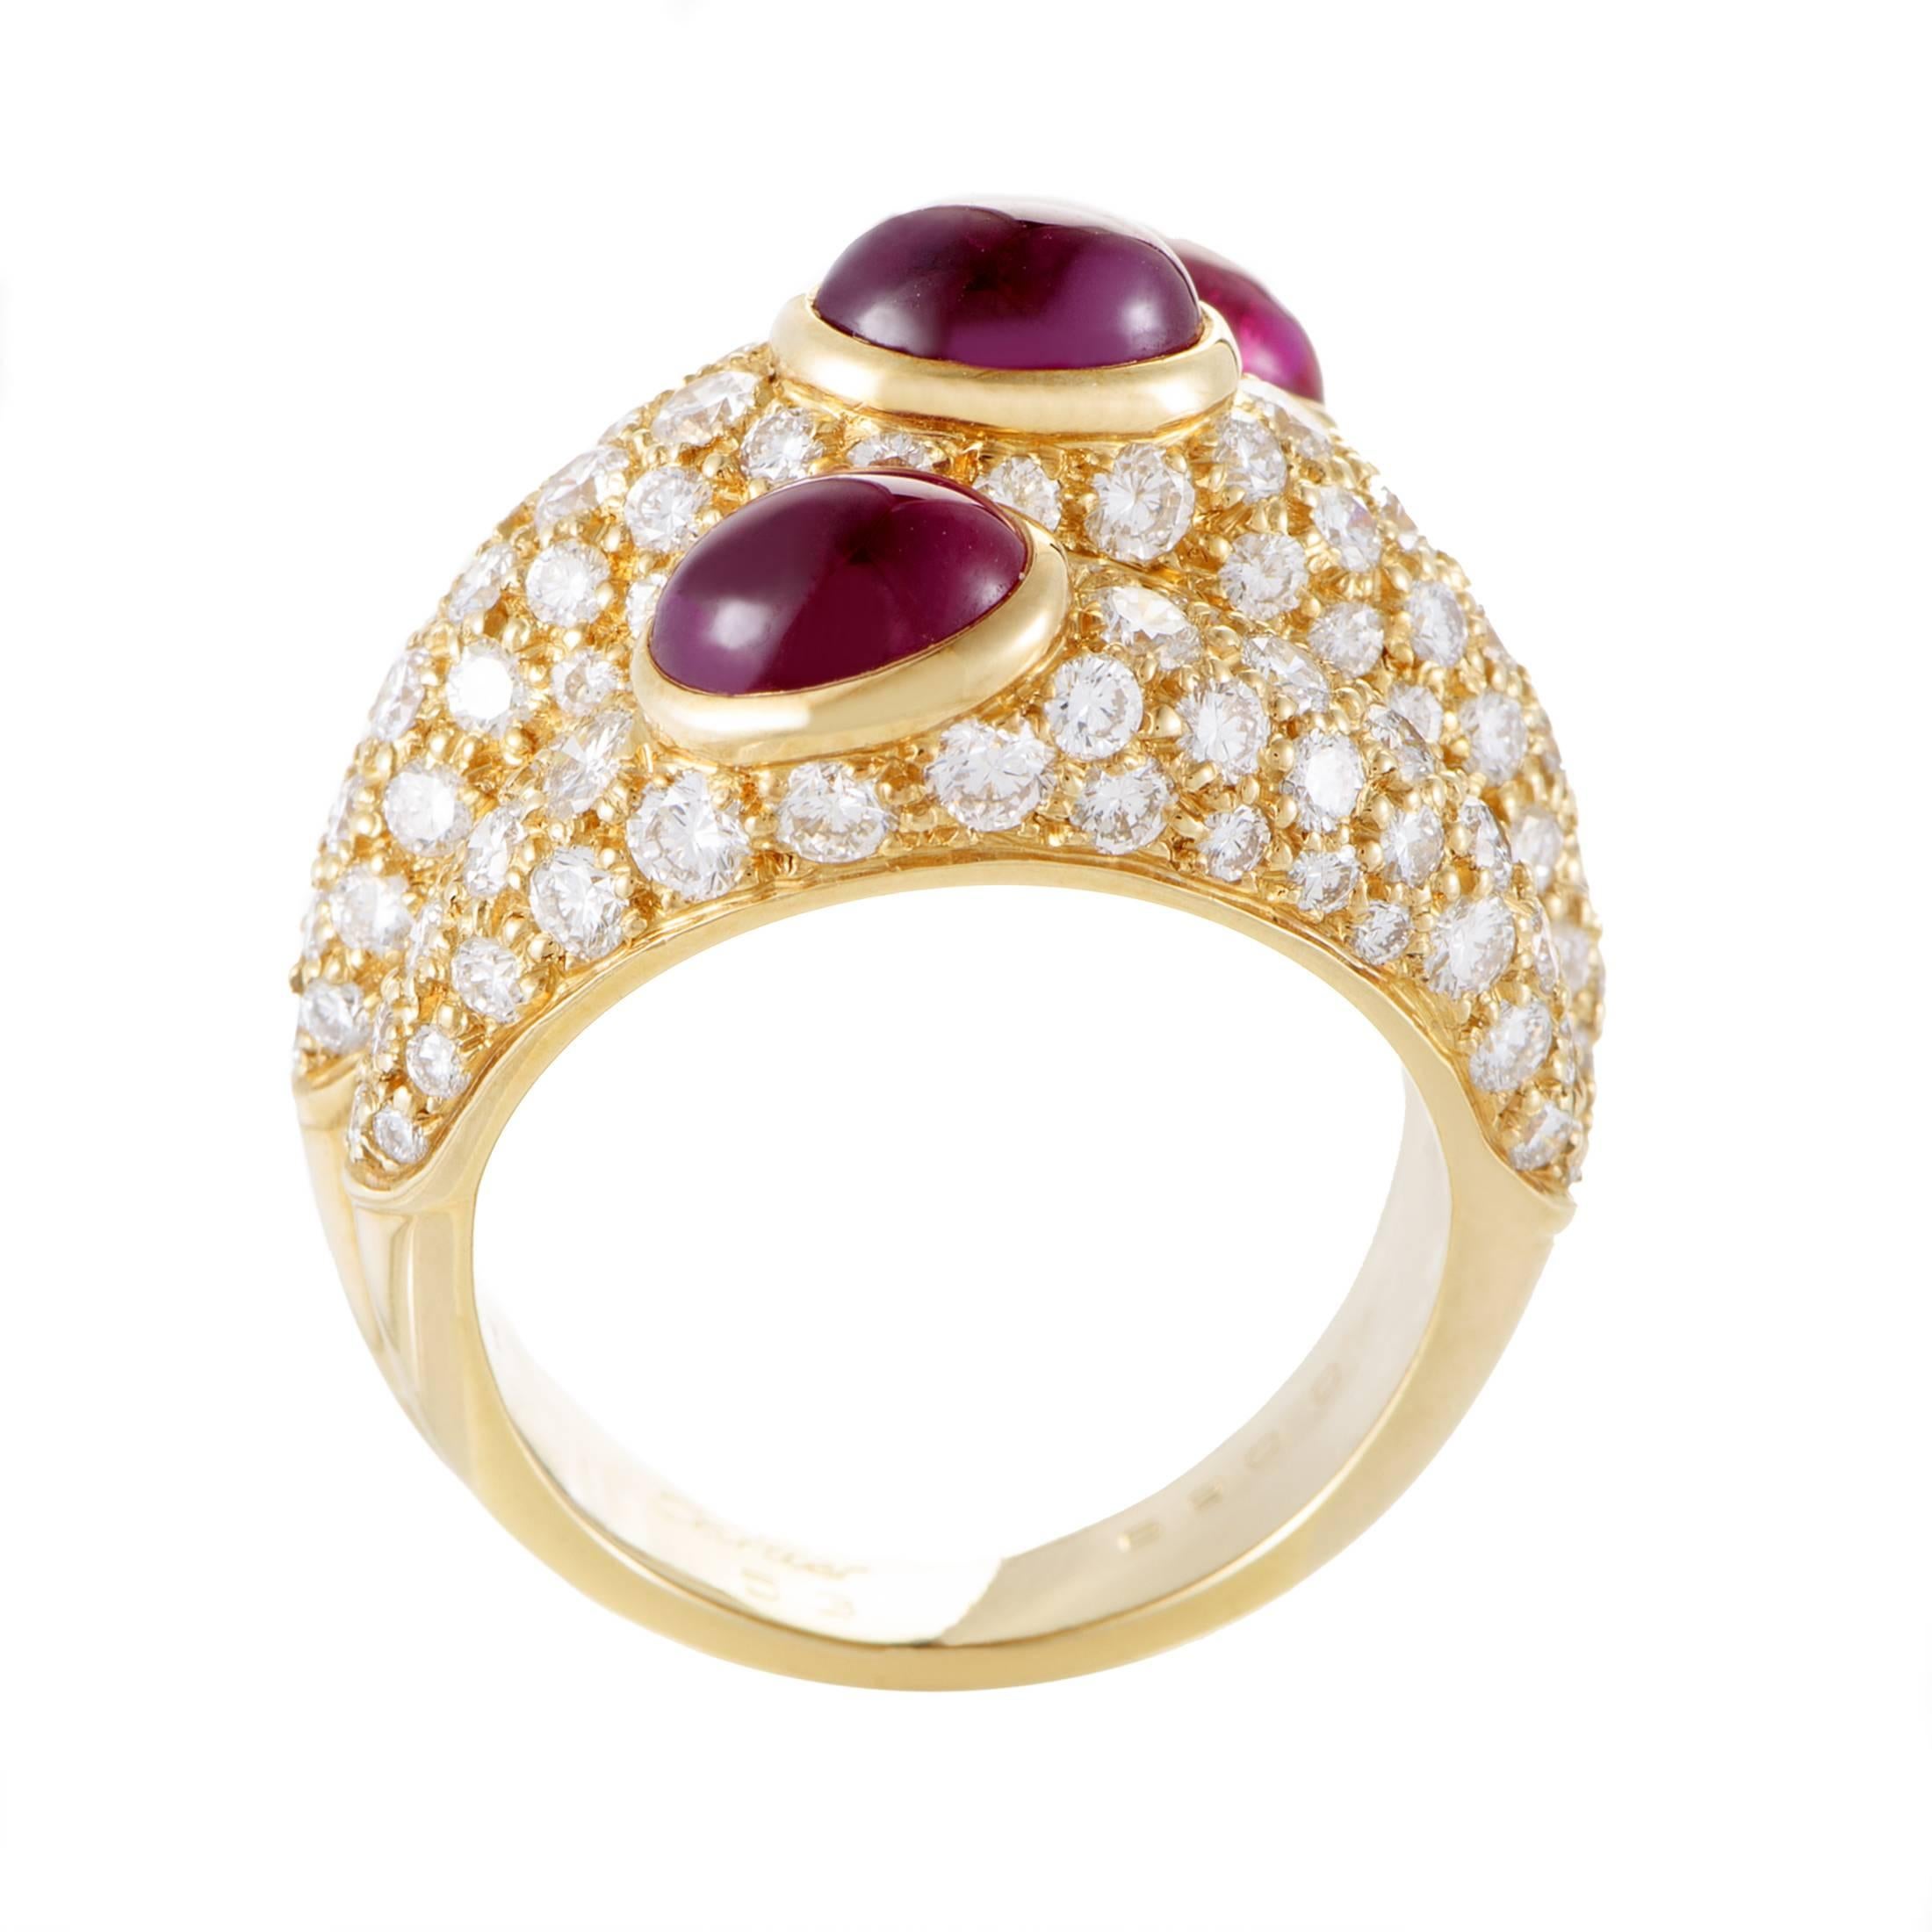 Exuding their passionate allure against a glamorous backdrop of 18K yellow gold and approximately 4.25 carats of glittering diamonds, the charming rubies weighing in total 4.00 carats perfectly complete the exuberant design of this exceptional ring